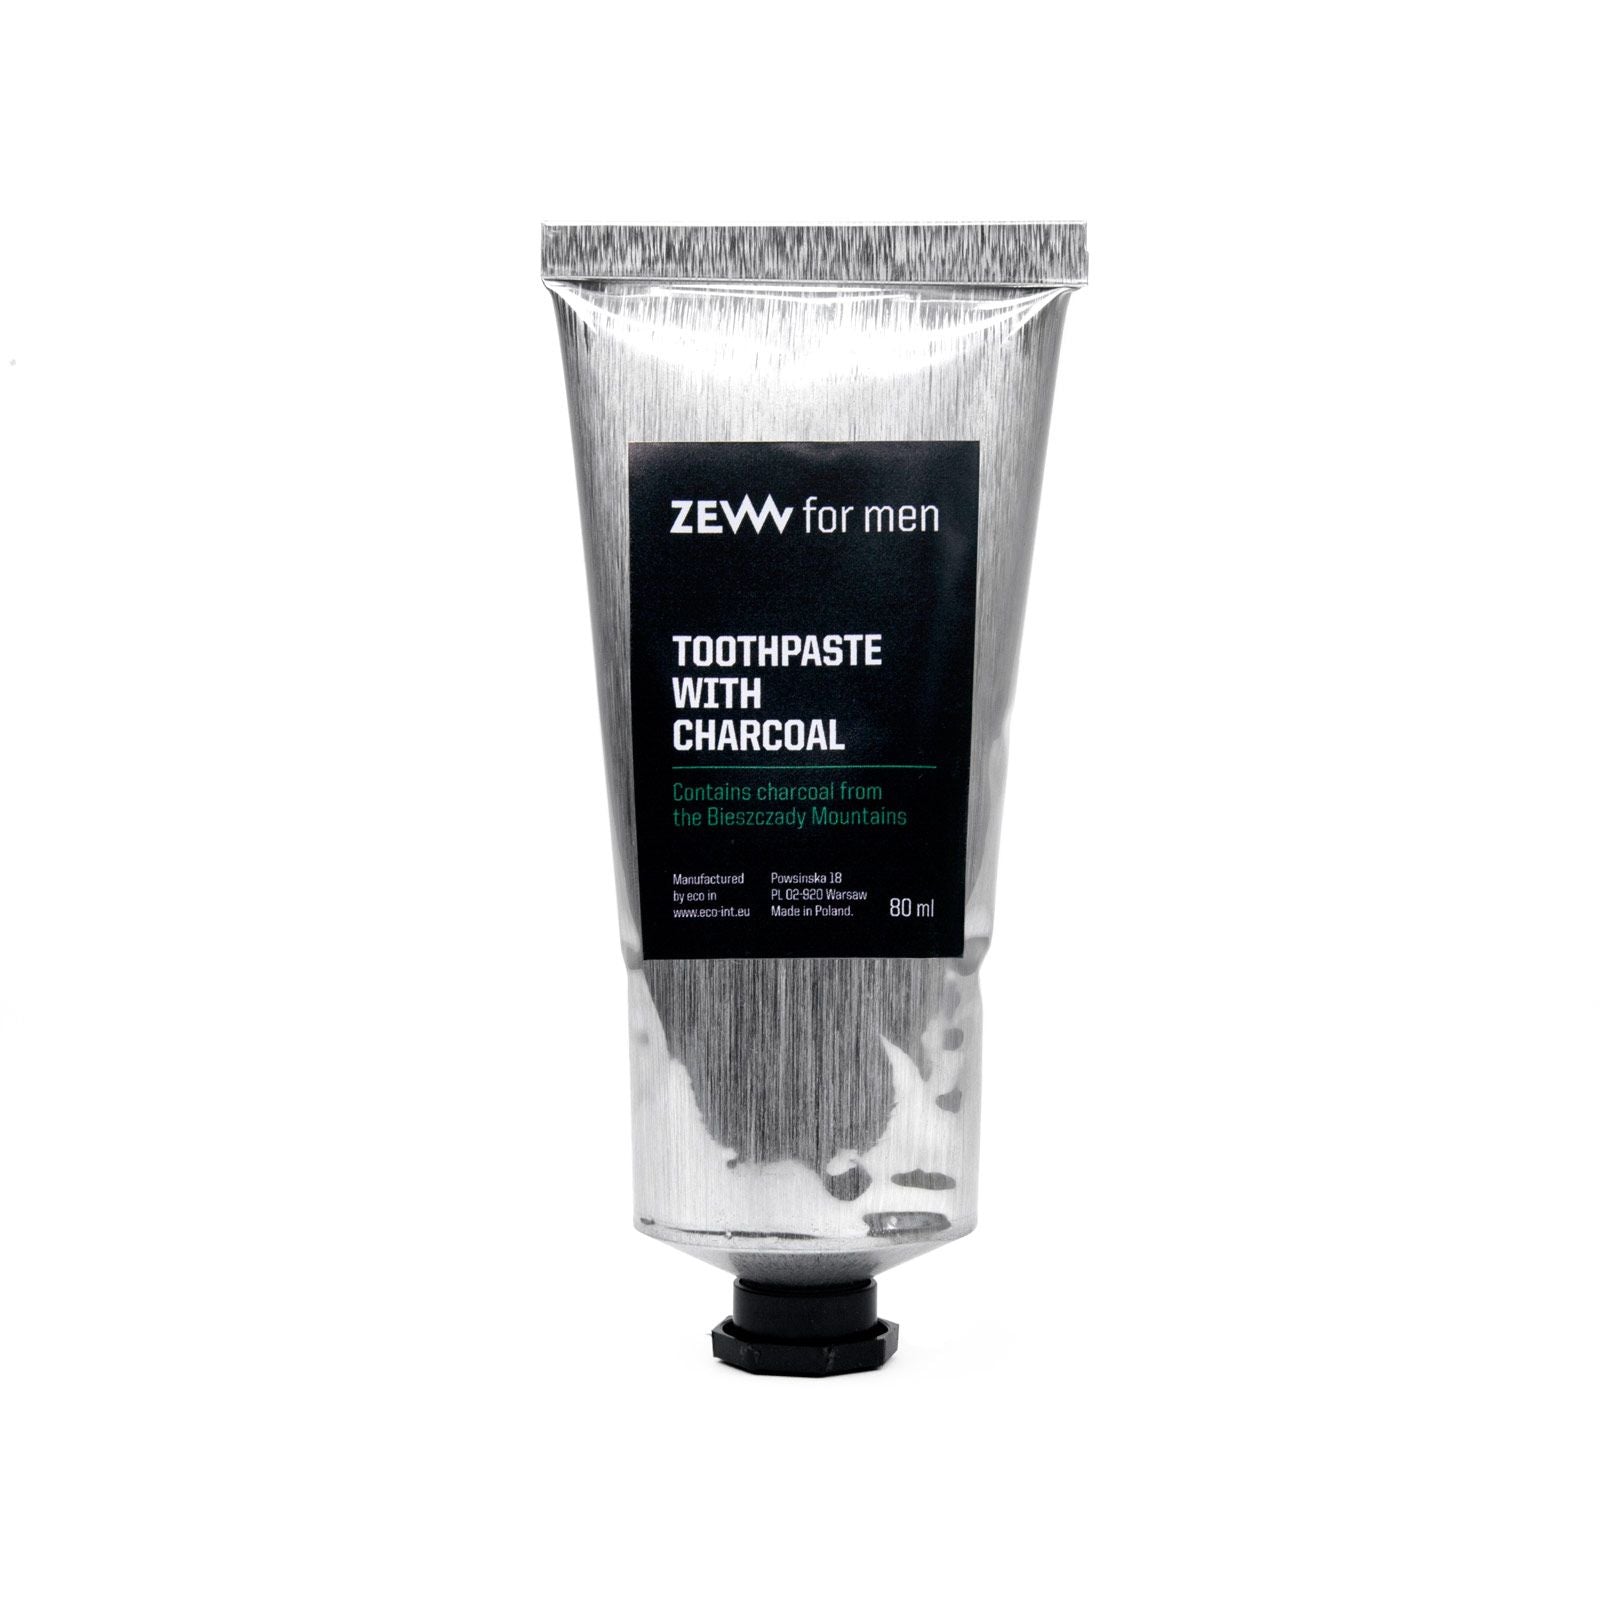 Charcoal Toothpaste with charcoal 80ml